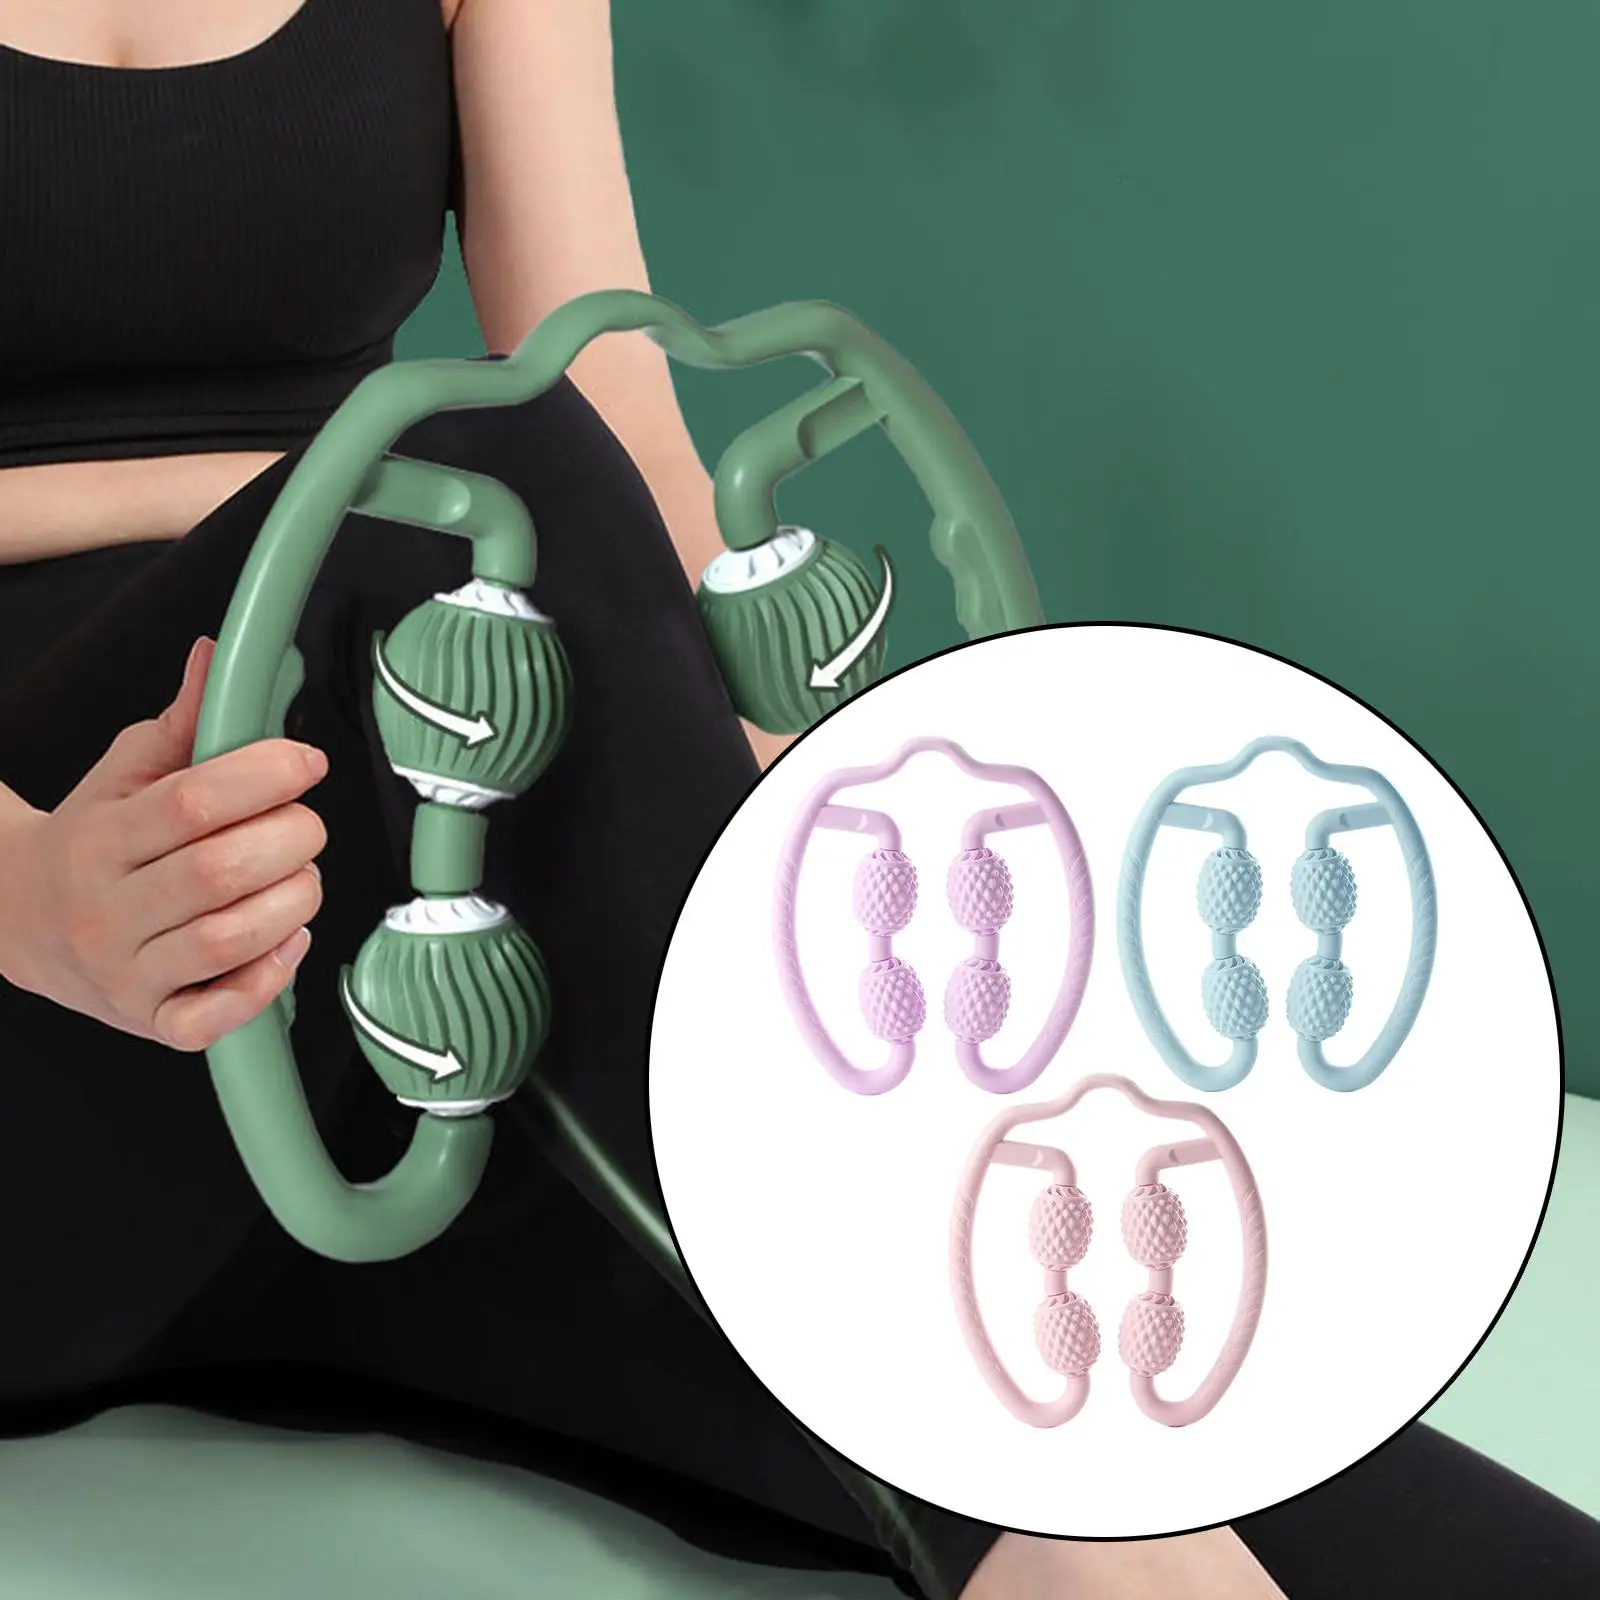 1x Body Roller Massager Lightweight Dual Angle Muscle Roller for Calves Legs Arms, Tennis Elbow Muscle Soreness Stiffness